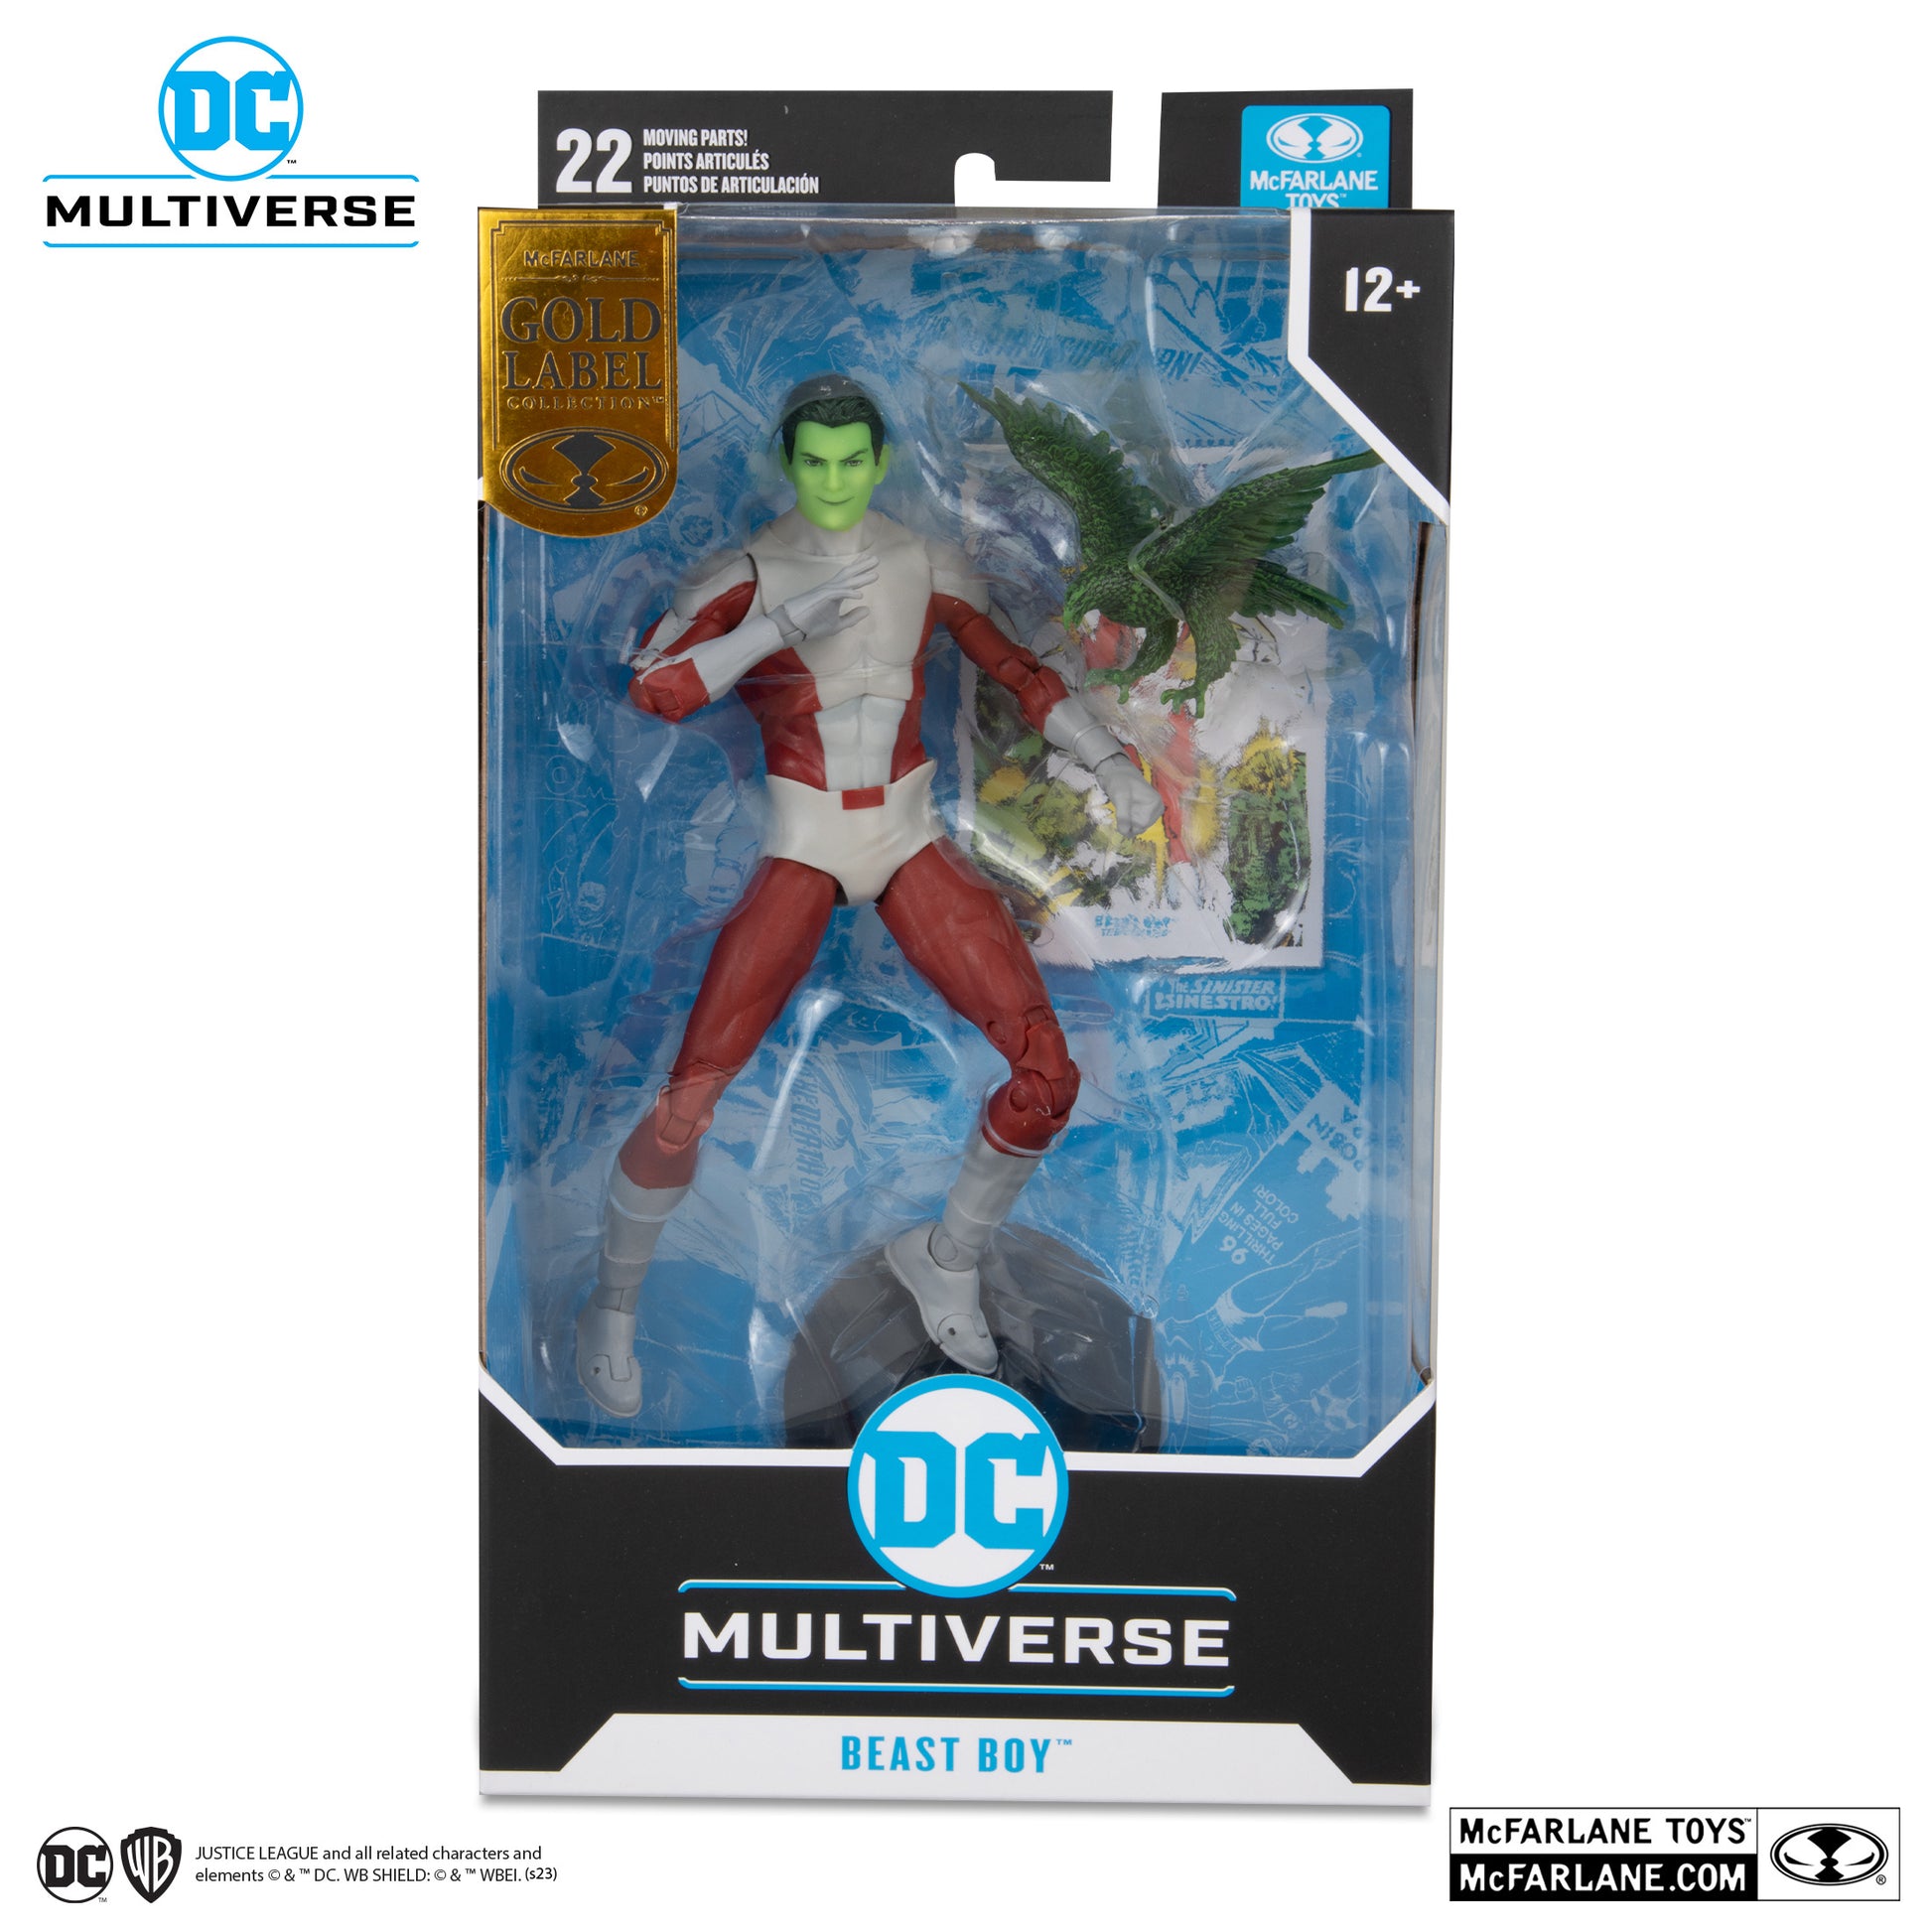 BEAST BOY (TEEN TITANS) (GOLD LABEL) ACTION FIGURE TOY in a box front view - Heretoserveyou